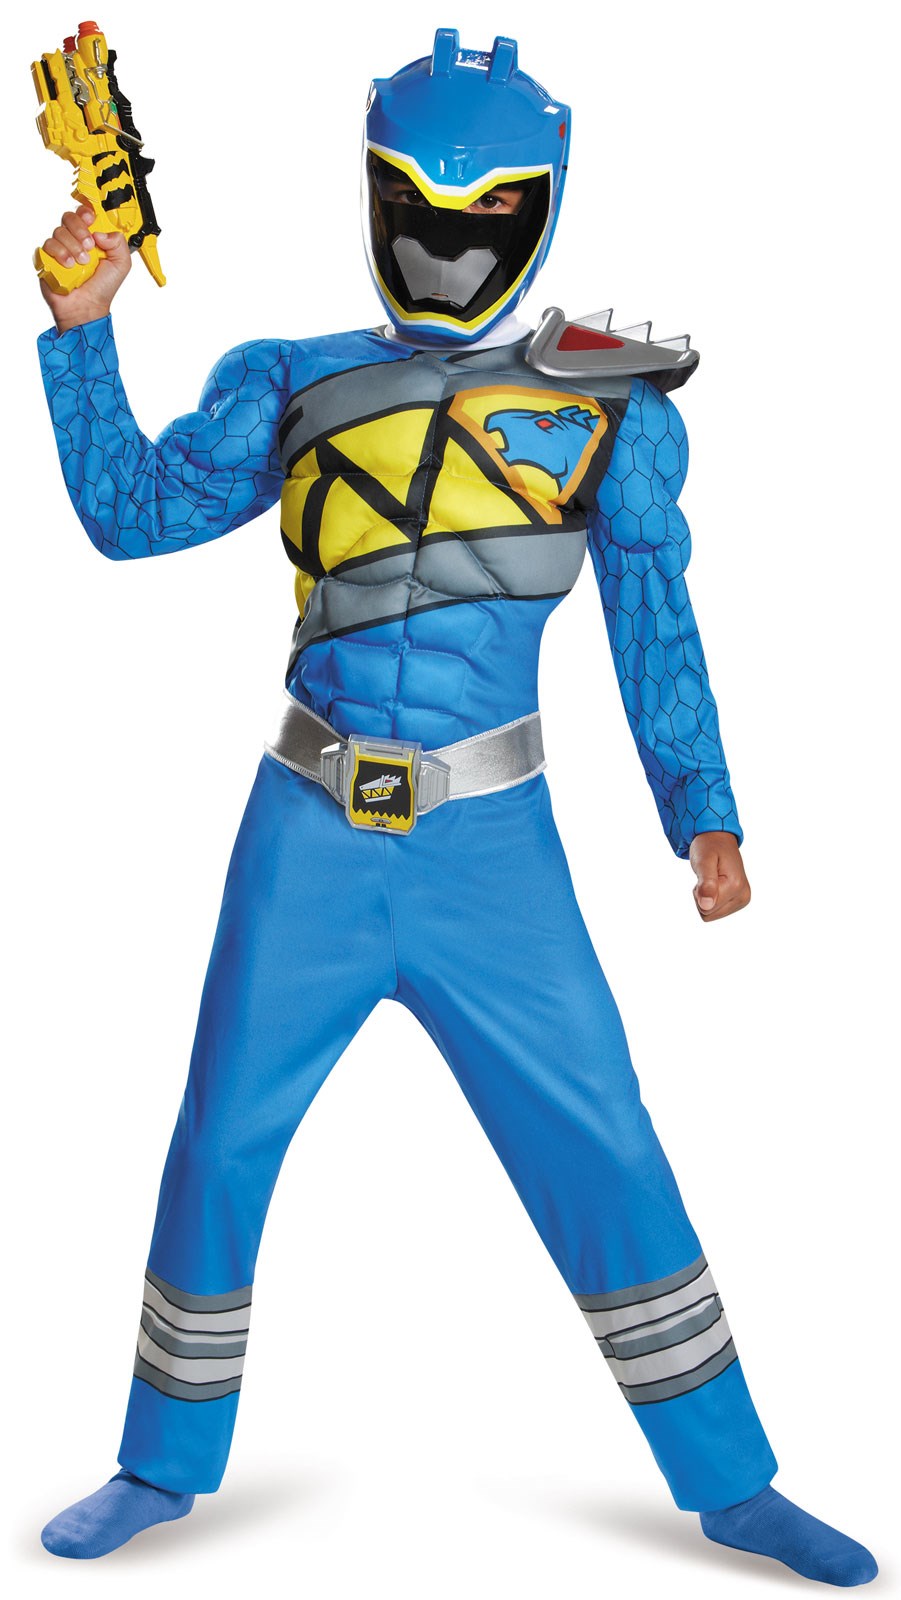 Power Rangers Dino Charge: Boys Blue Ranger Muscle Costume